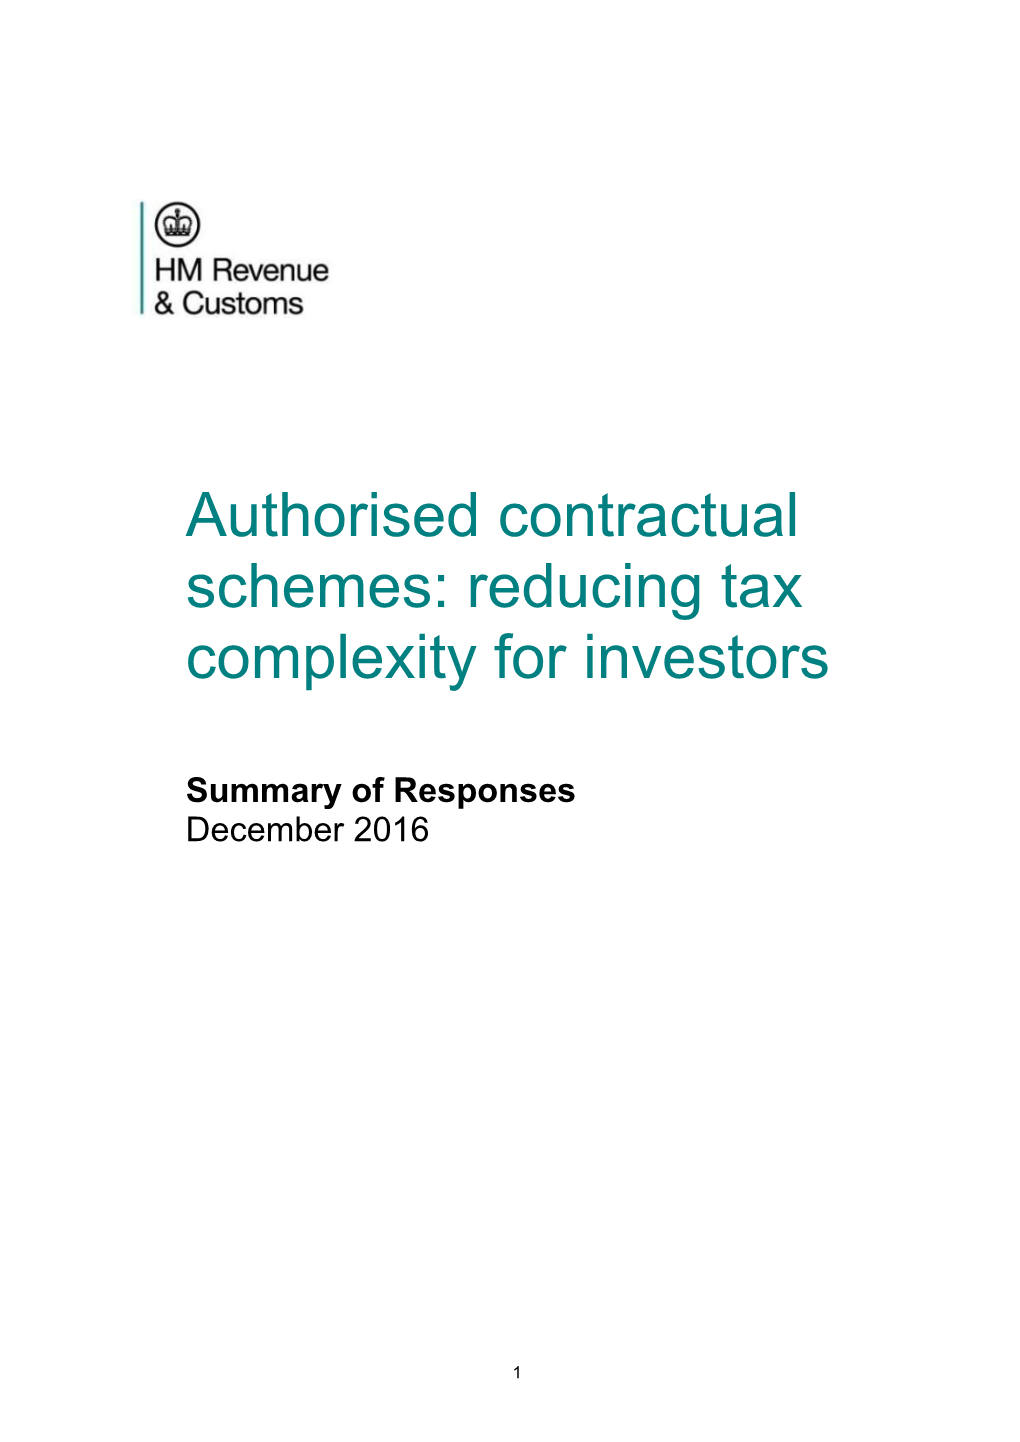 Authorised Contractual Schemes: Reducing Tax Complexity for Investors